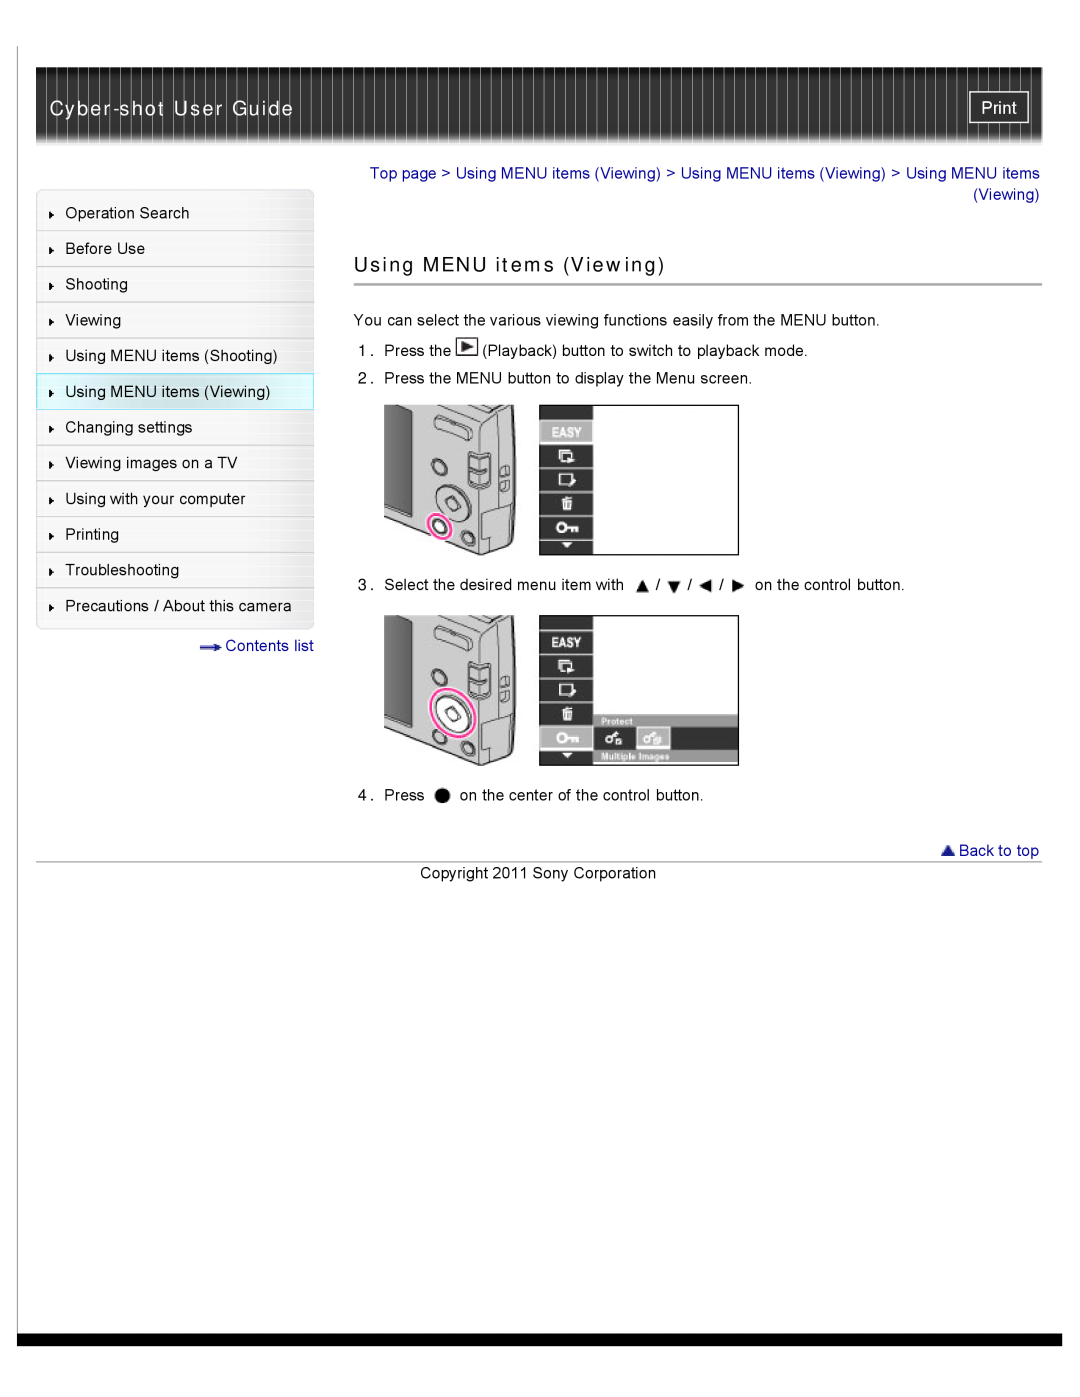 Sony DSC-W510 manual Using MENU items Viewing, Cyber-shot User Guide, Print, Contents list, Back to top 